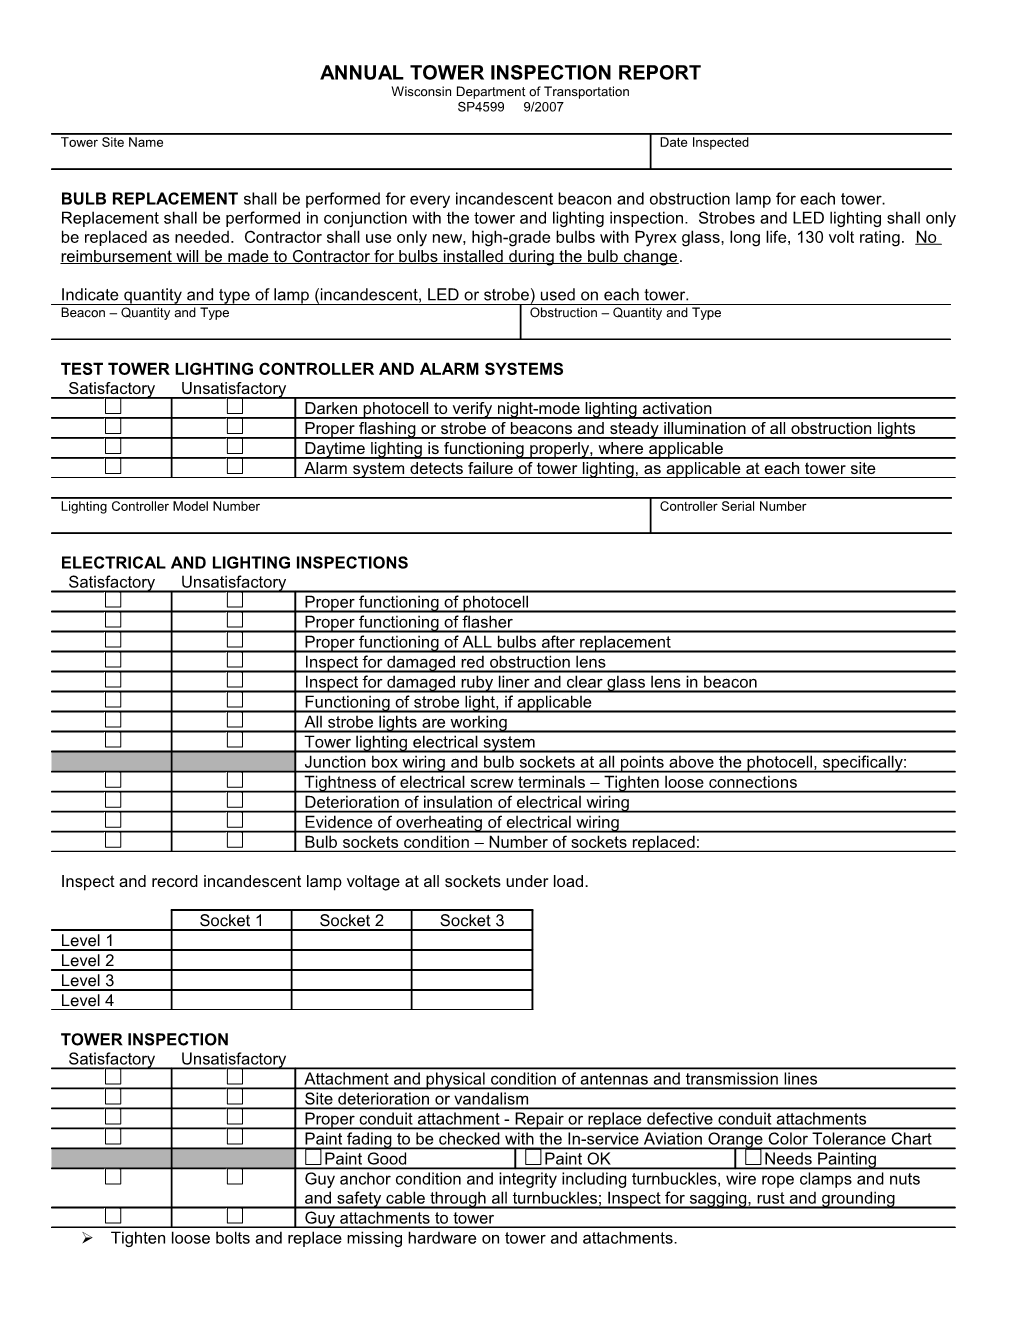 SP4599 Annual Tower Inspection Report